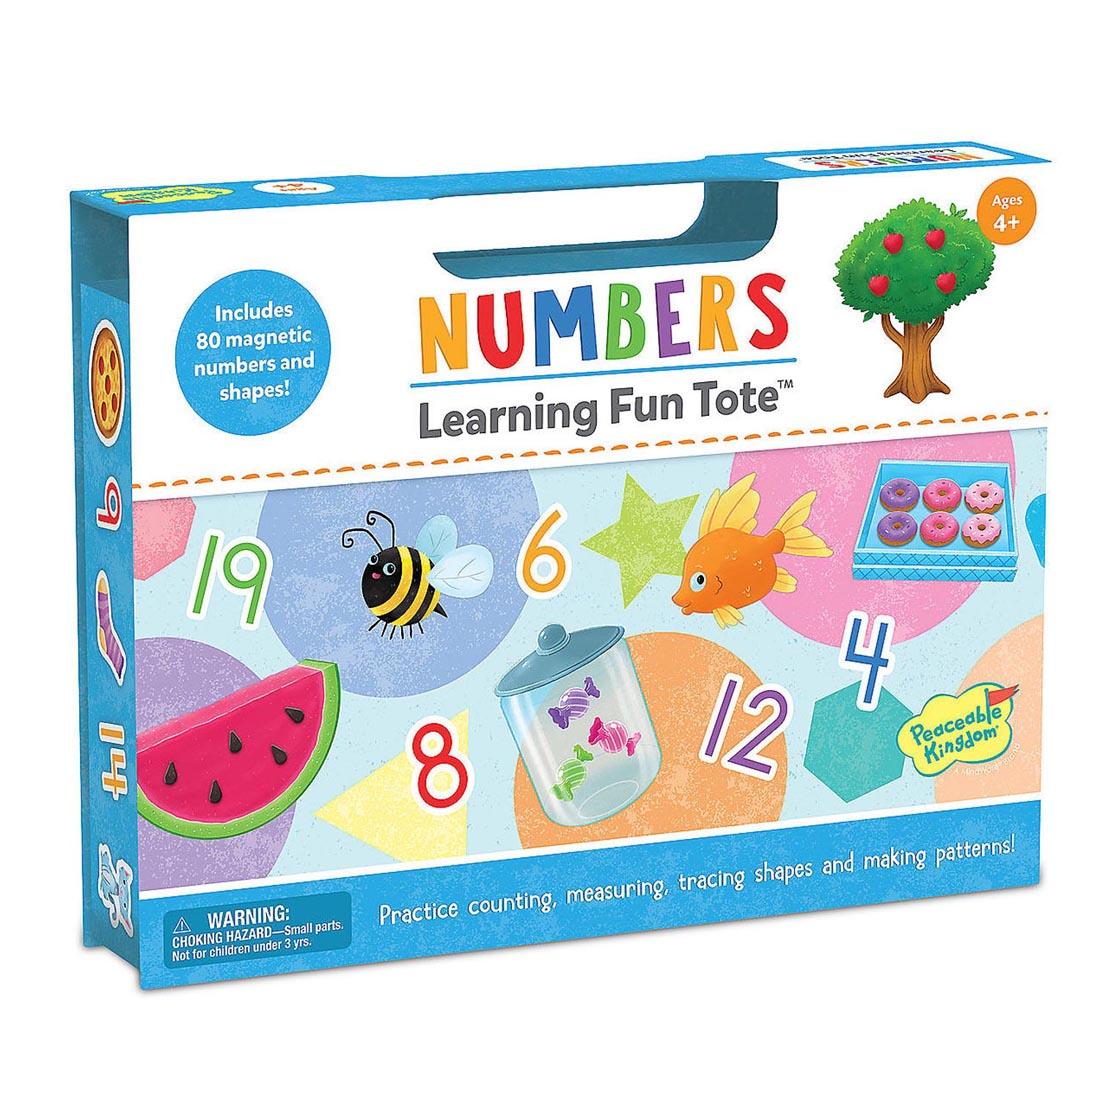 Numbers Learning Fun Tote By Peaceable Kingdom in package